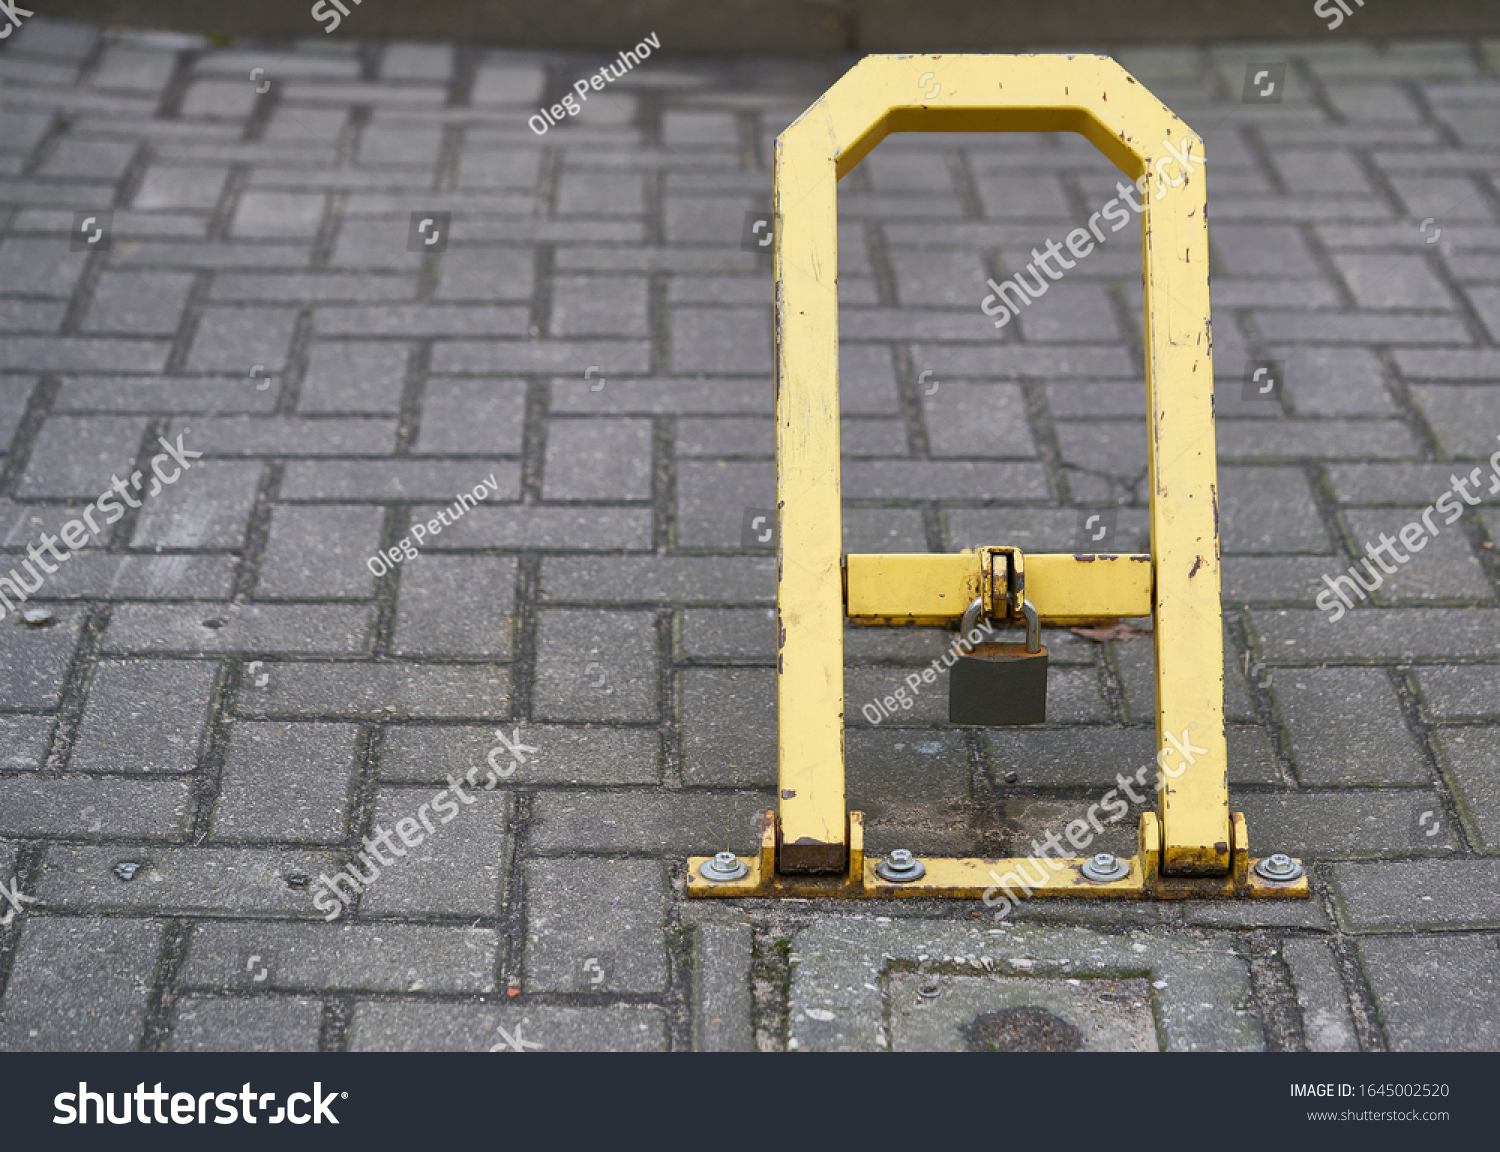 Manual car parking barrier with lock and stop sign. Car parking lock device. Dedicated parking for guests. Traffic rules, prohibitory signs #1645002520